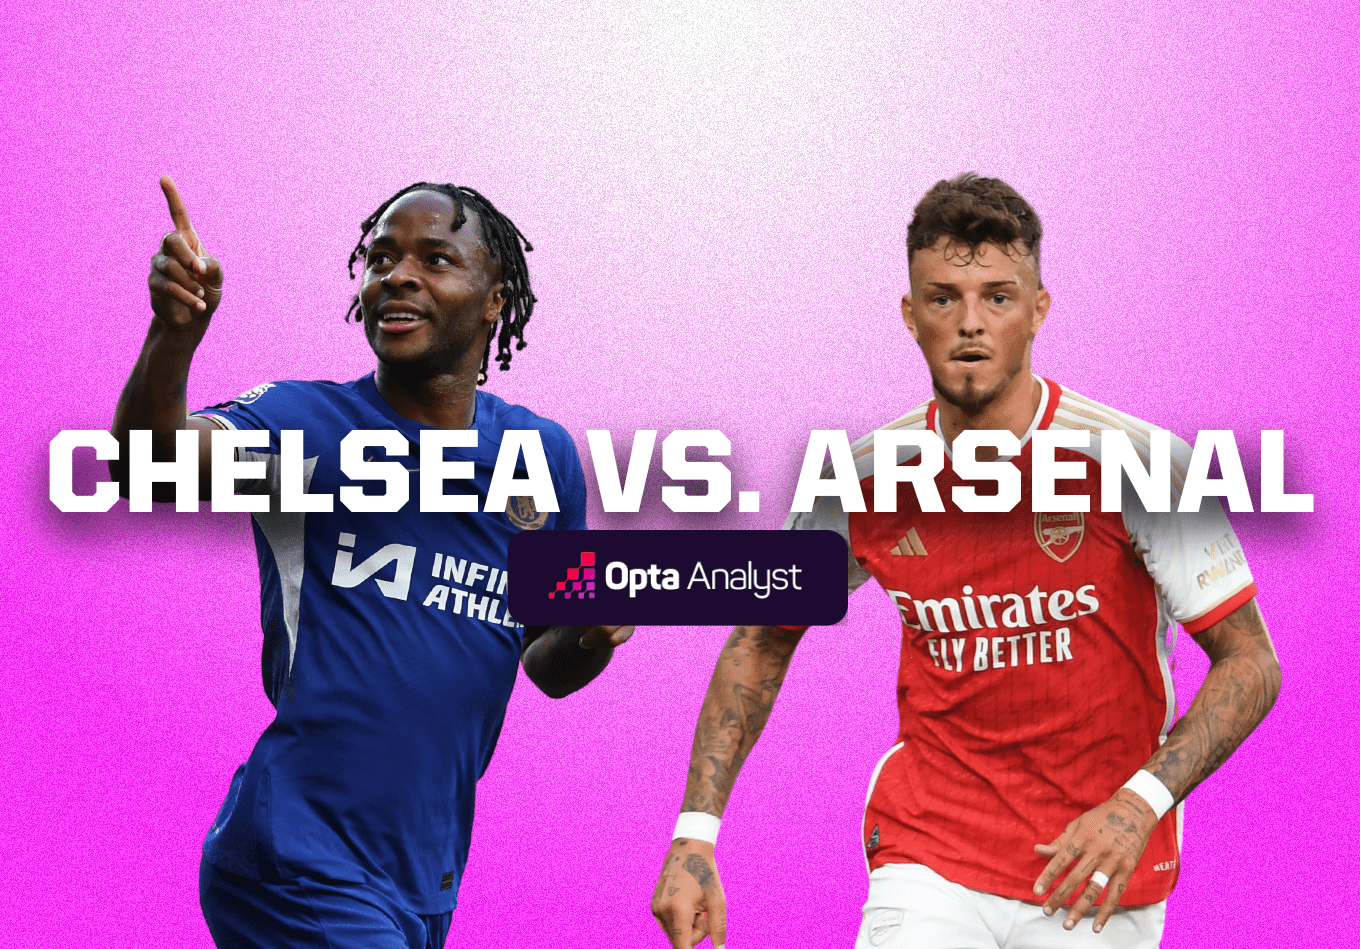 Chelsea vs Arsenal: Prediction and Preview | The Analyst